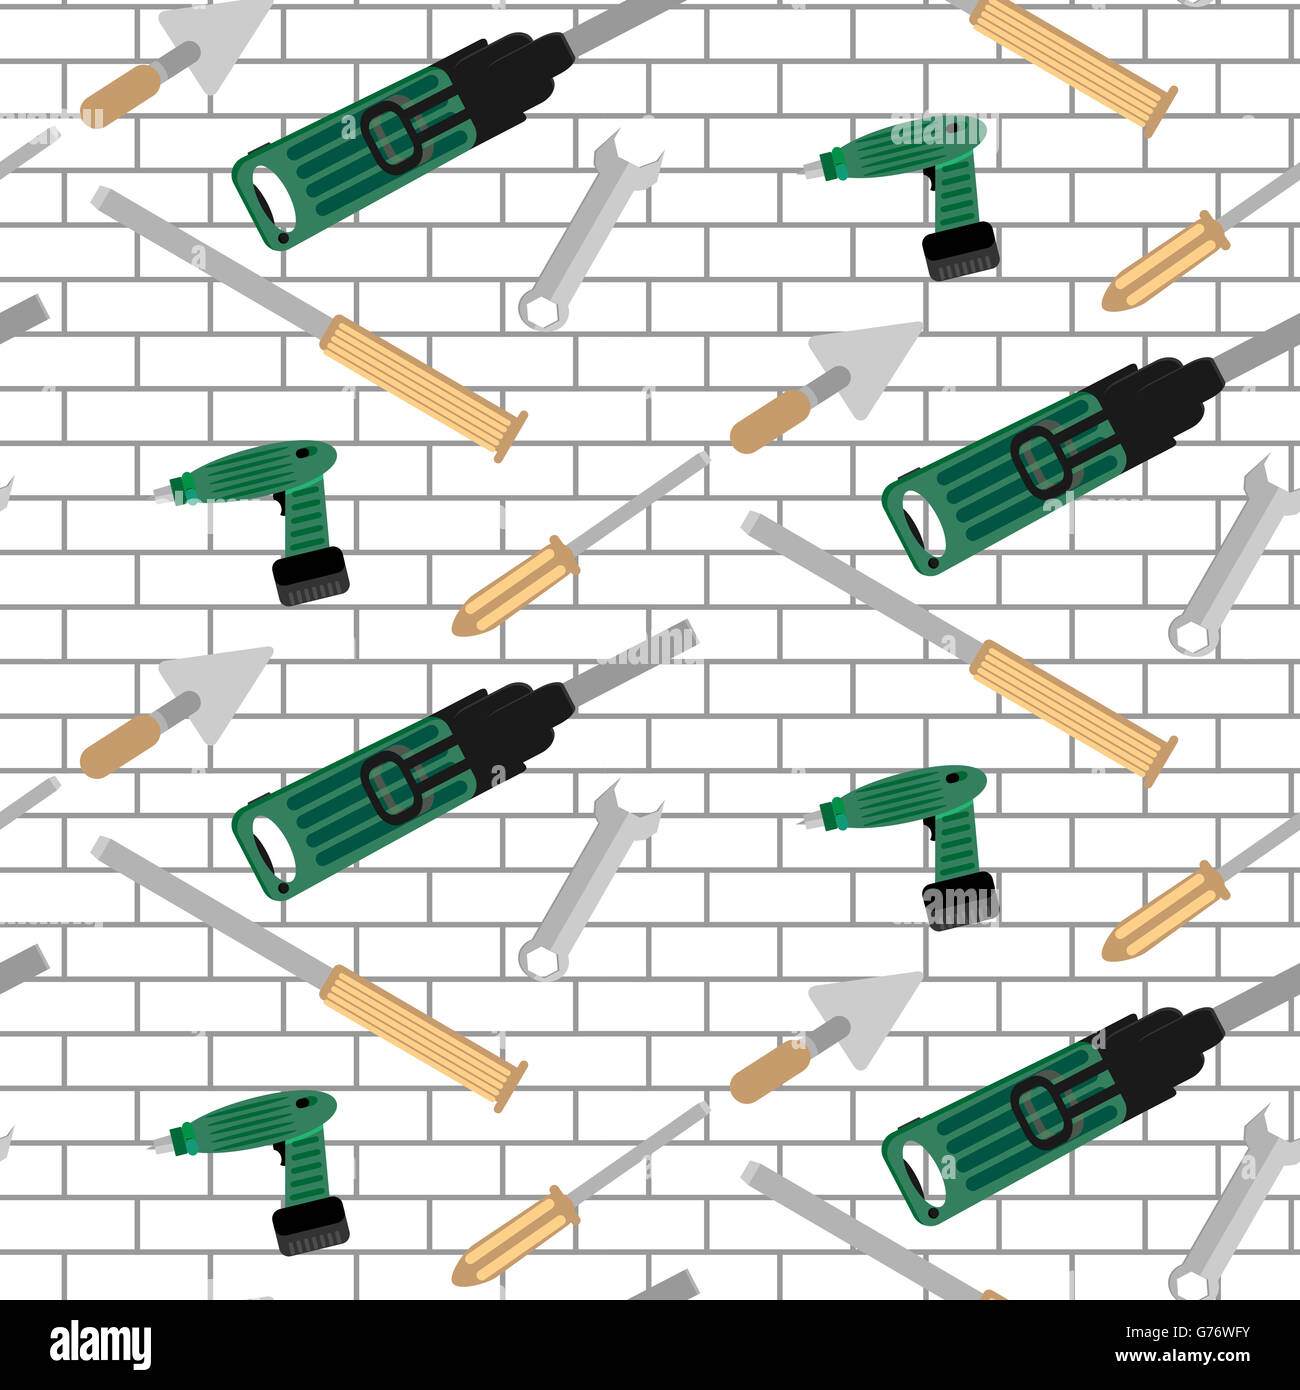 Pattern tools construction on brick wall. Repair work tool, illustration screwdrive and punch, chisel, and trowel vector Stock Photo